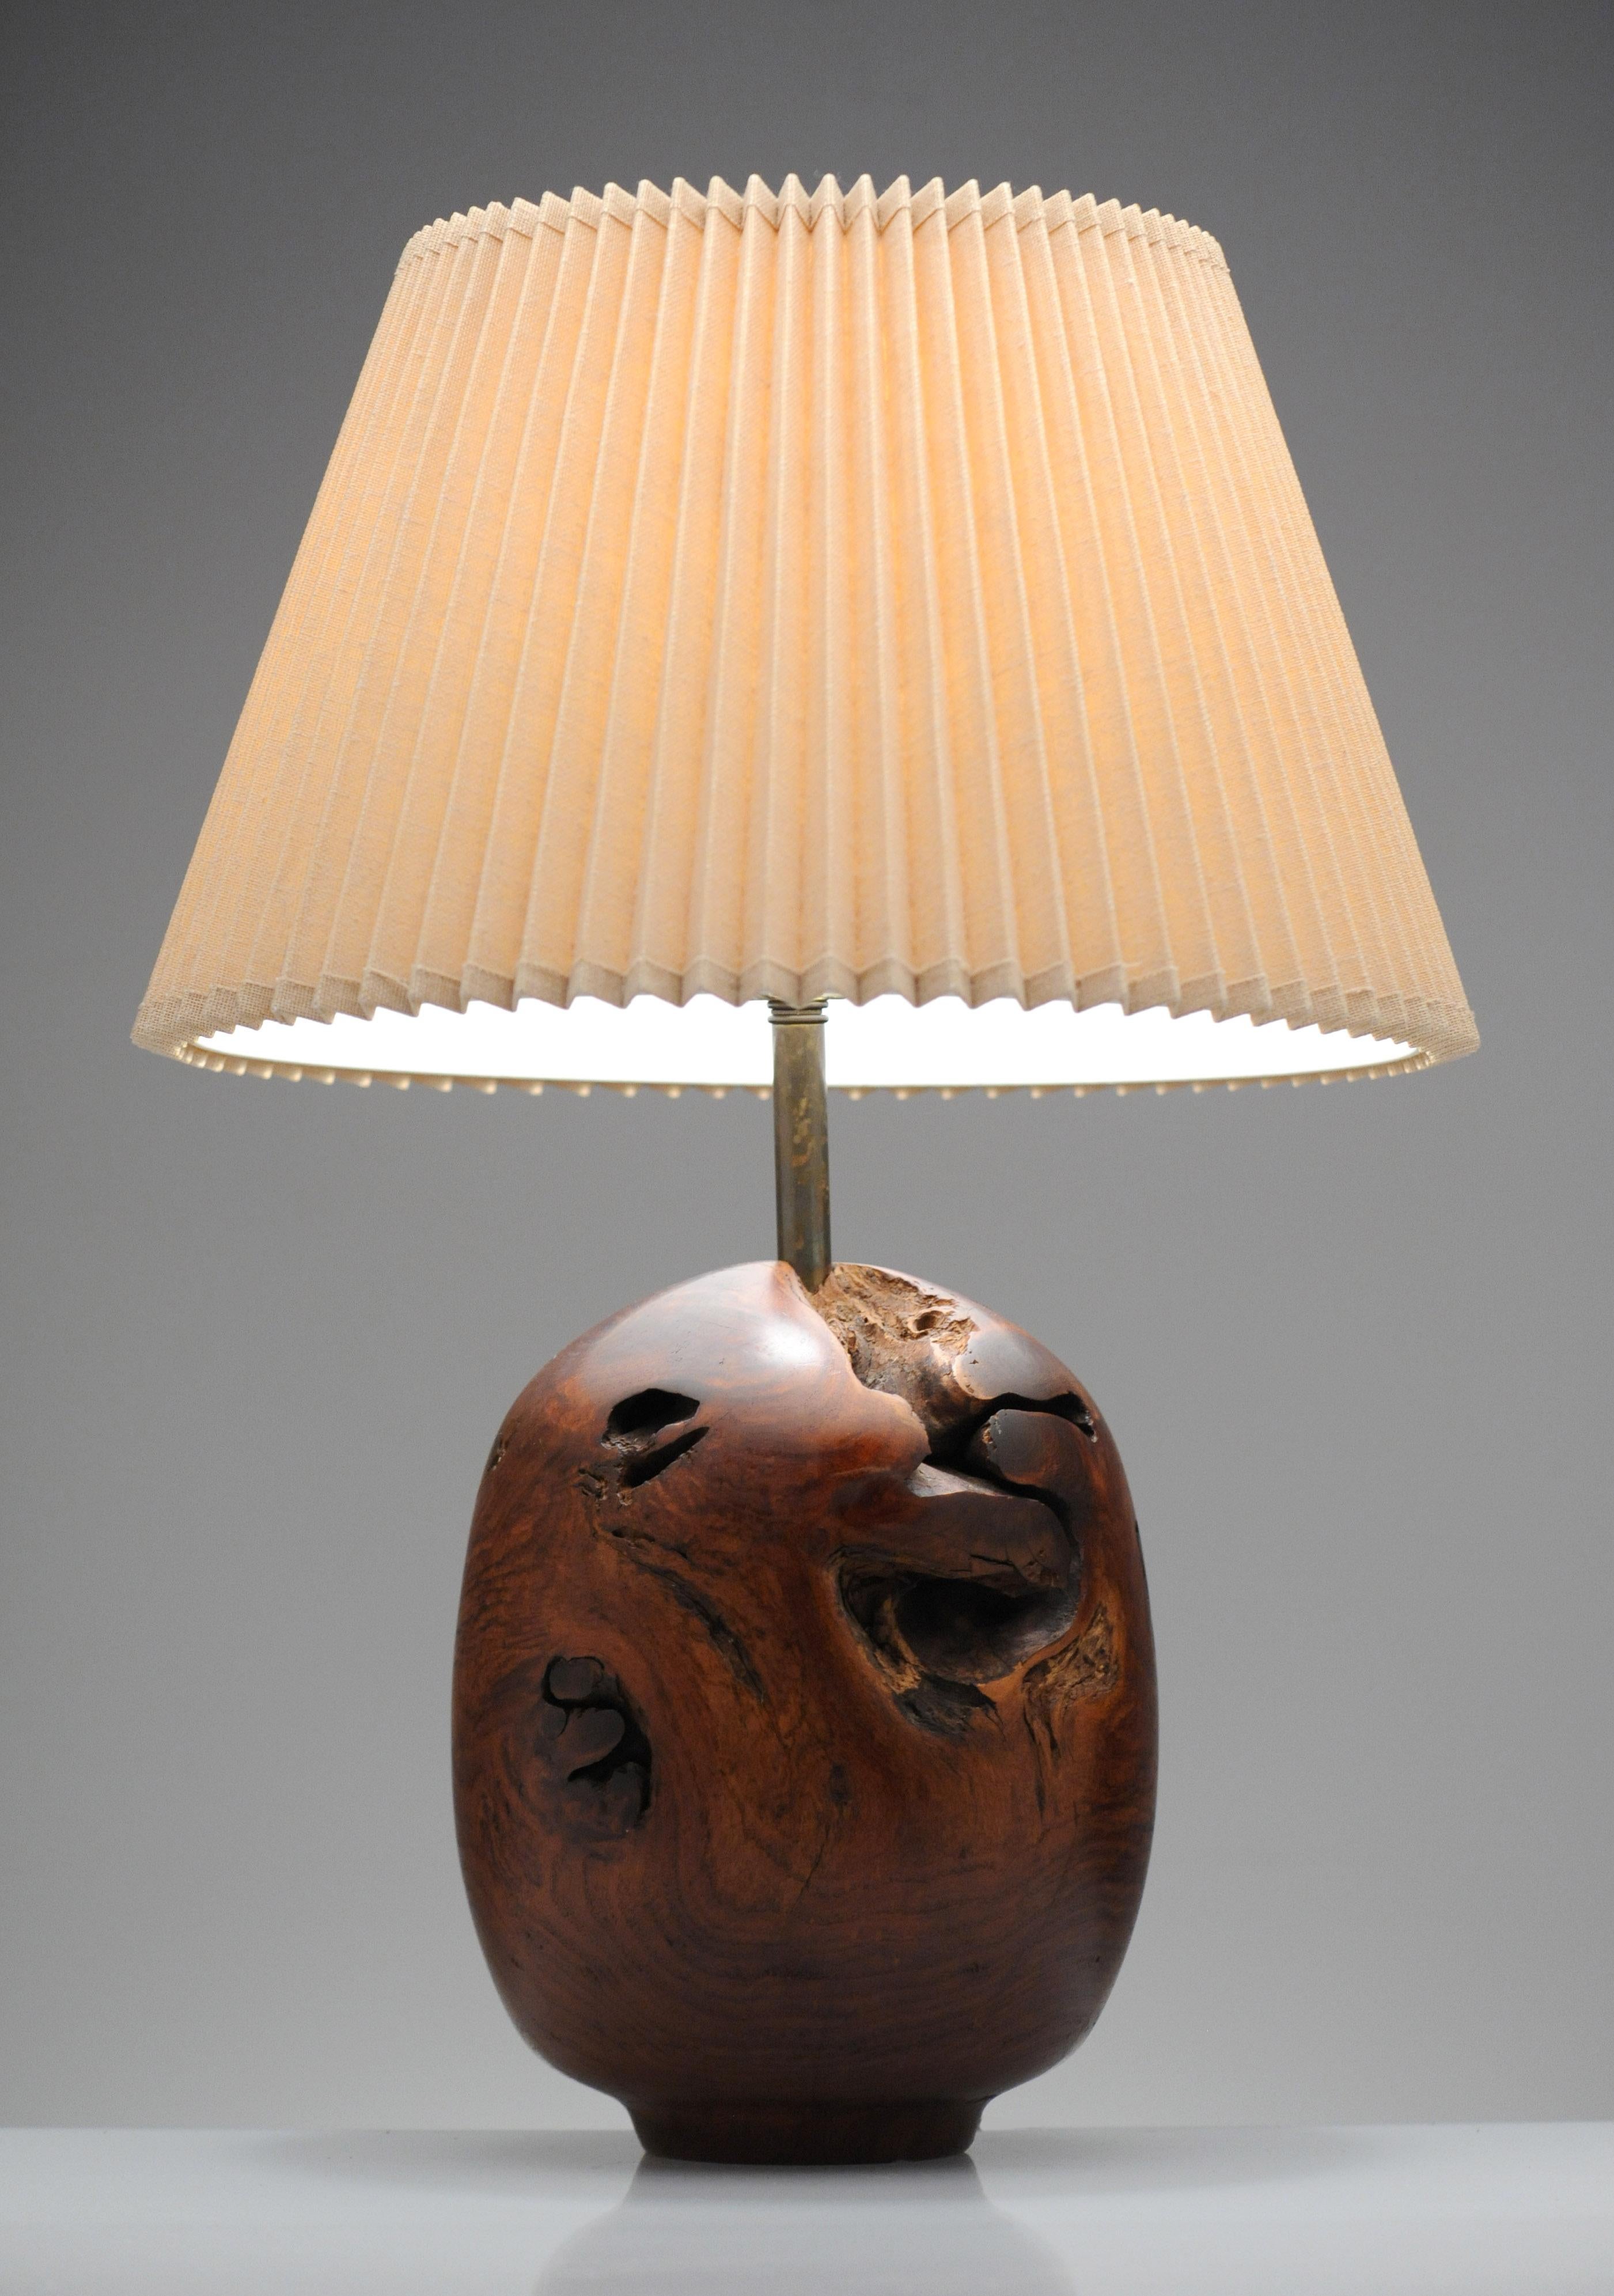 Beautiful turned wood lamp by Chris Eggers. Lamp is signed and dated 1986. 

Artist statement:
I primarily use tree stumps for my illuminated sculptures. Stumps are the heart of the tree, twisting in several directions with holes and knots. The